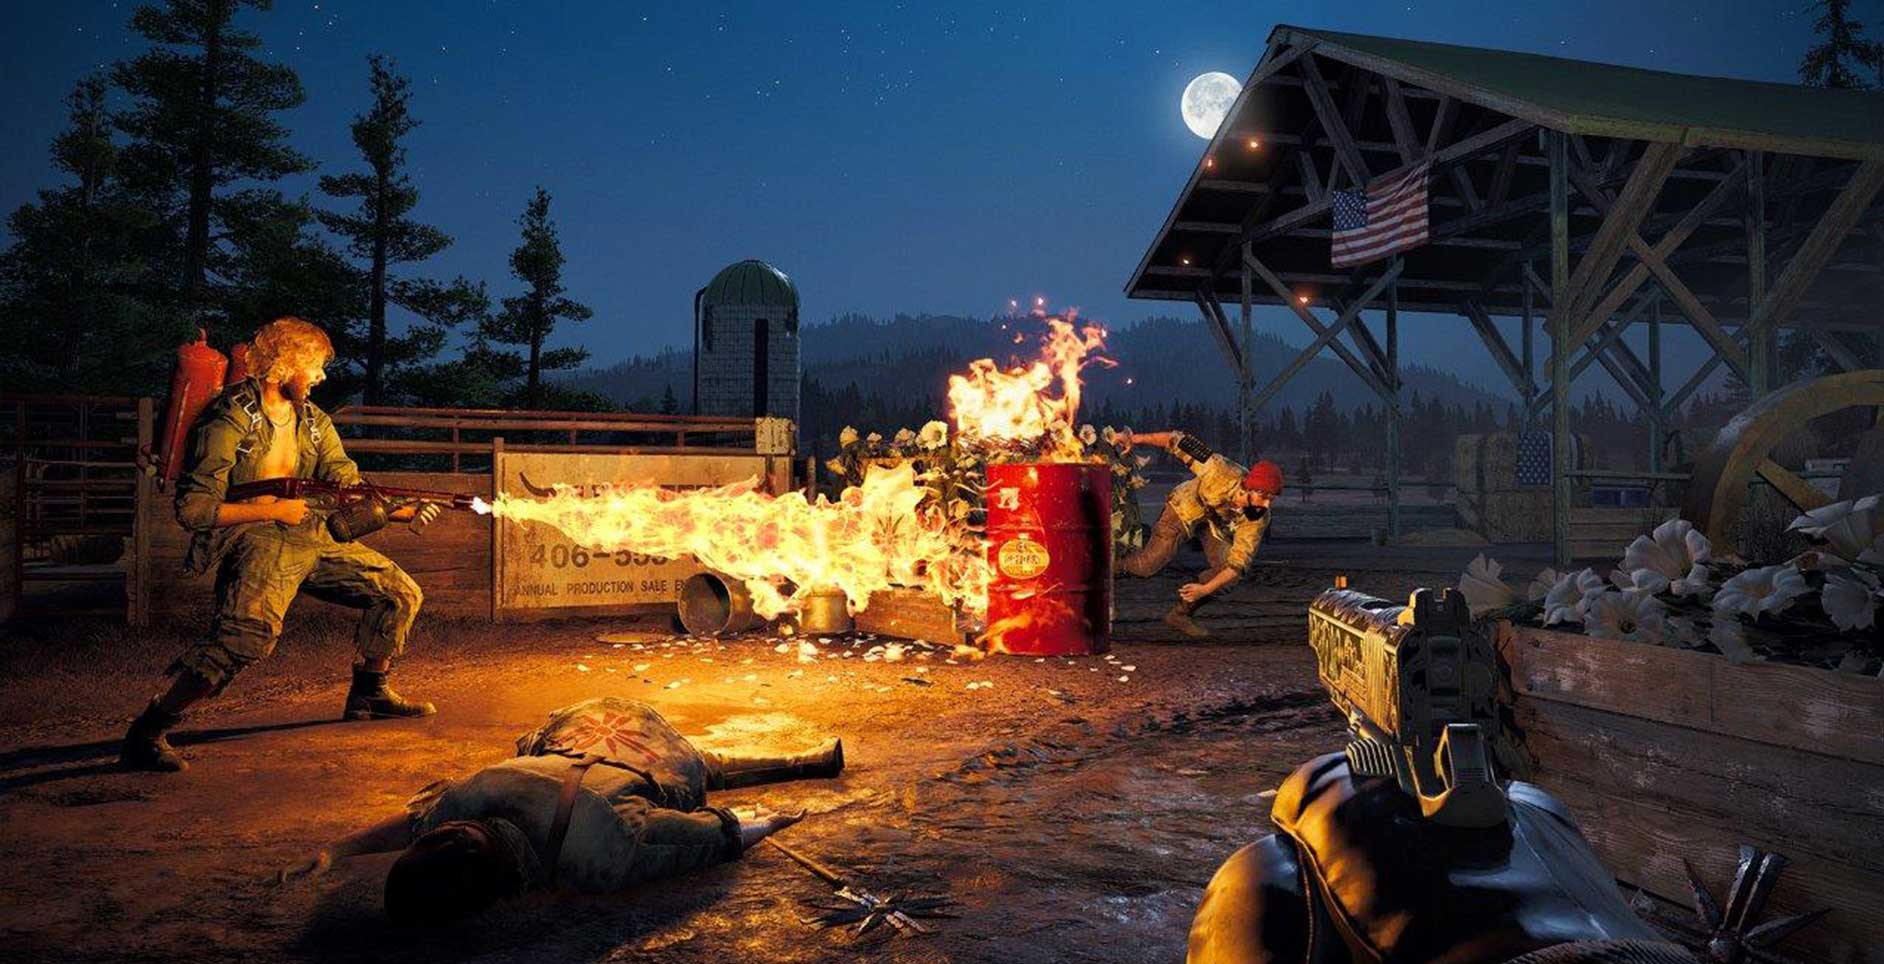 Is Far Cry 5 Cross Platform?  PC, PS4, And Xbox One - Game